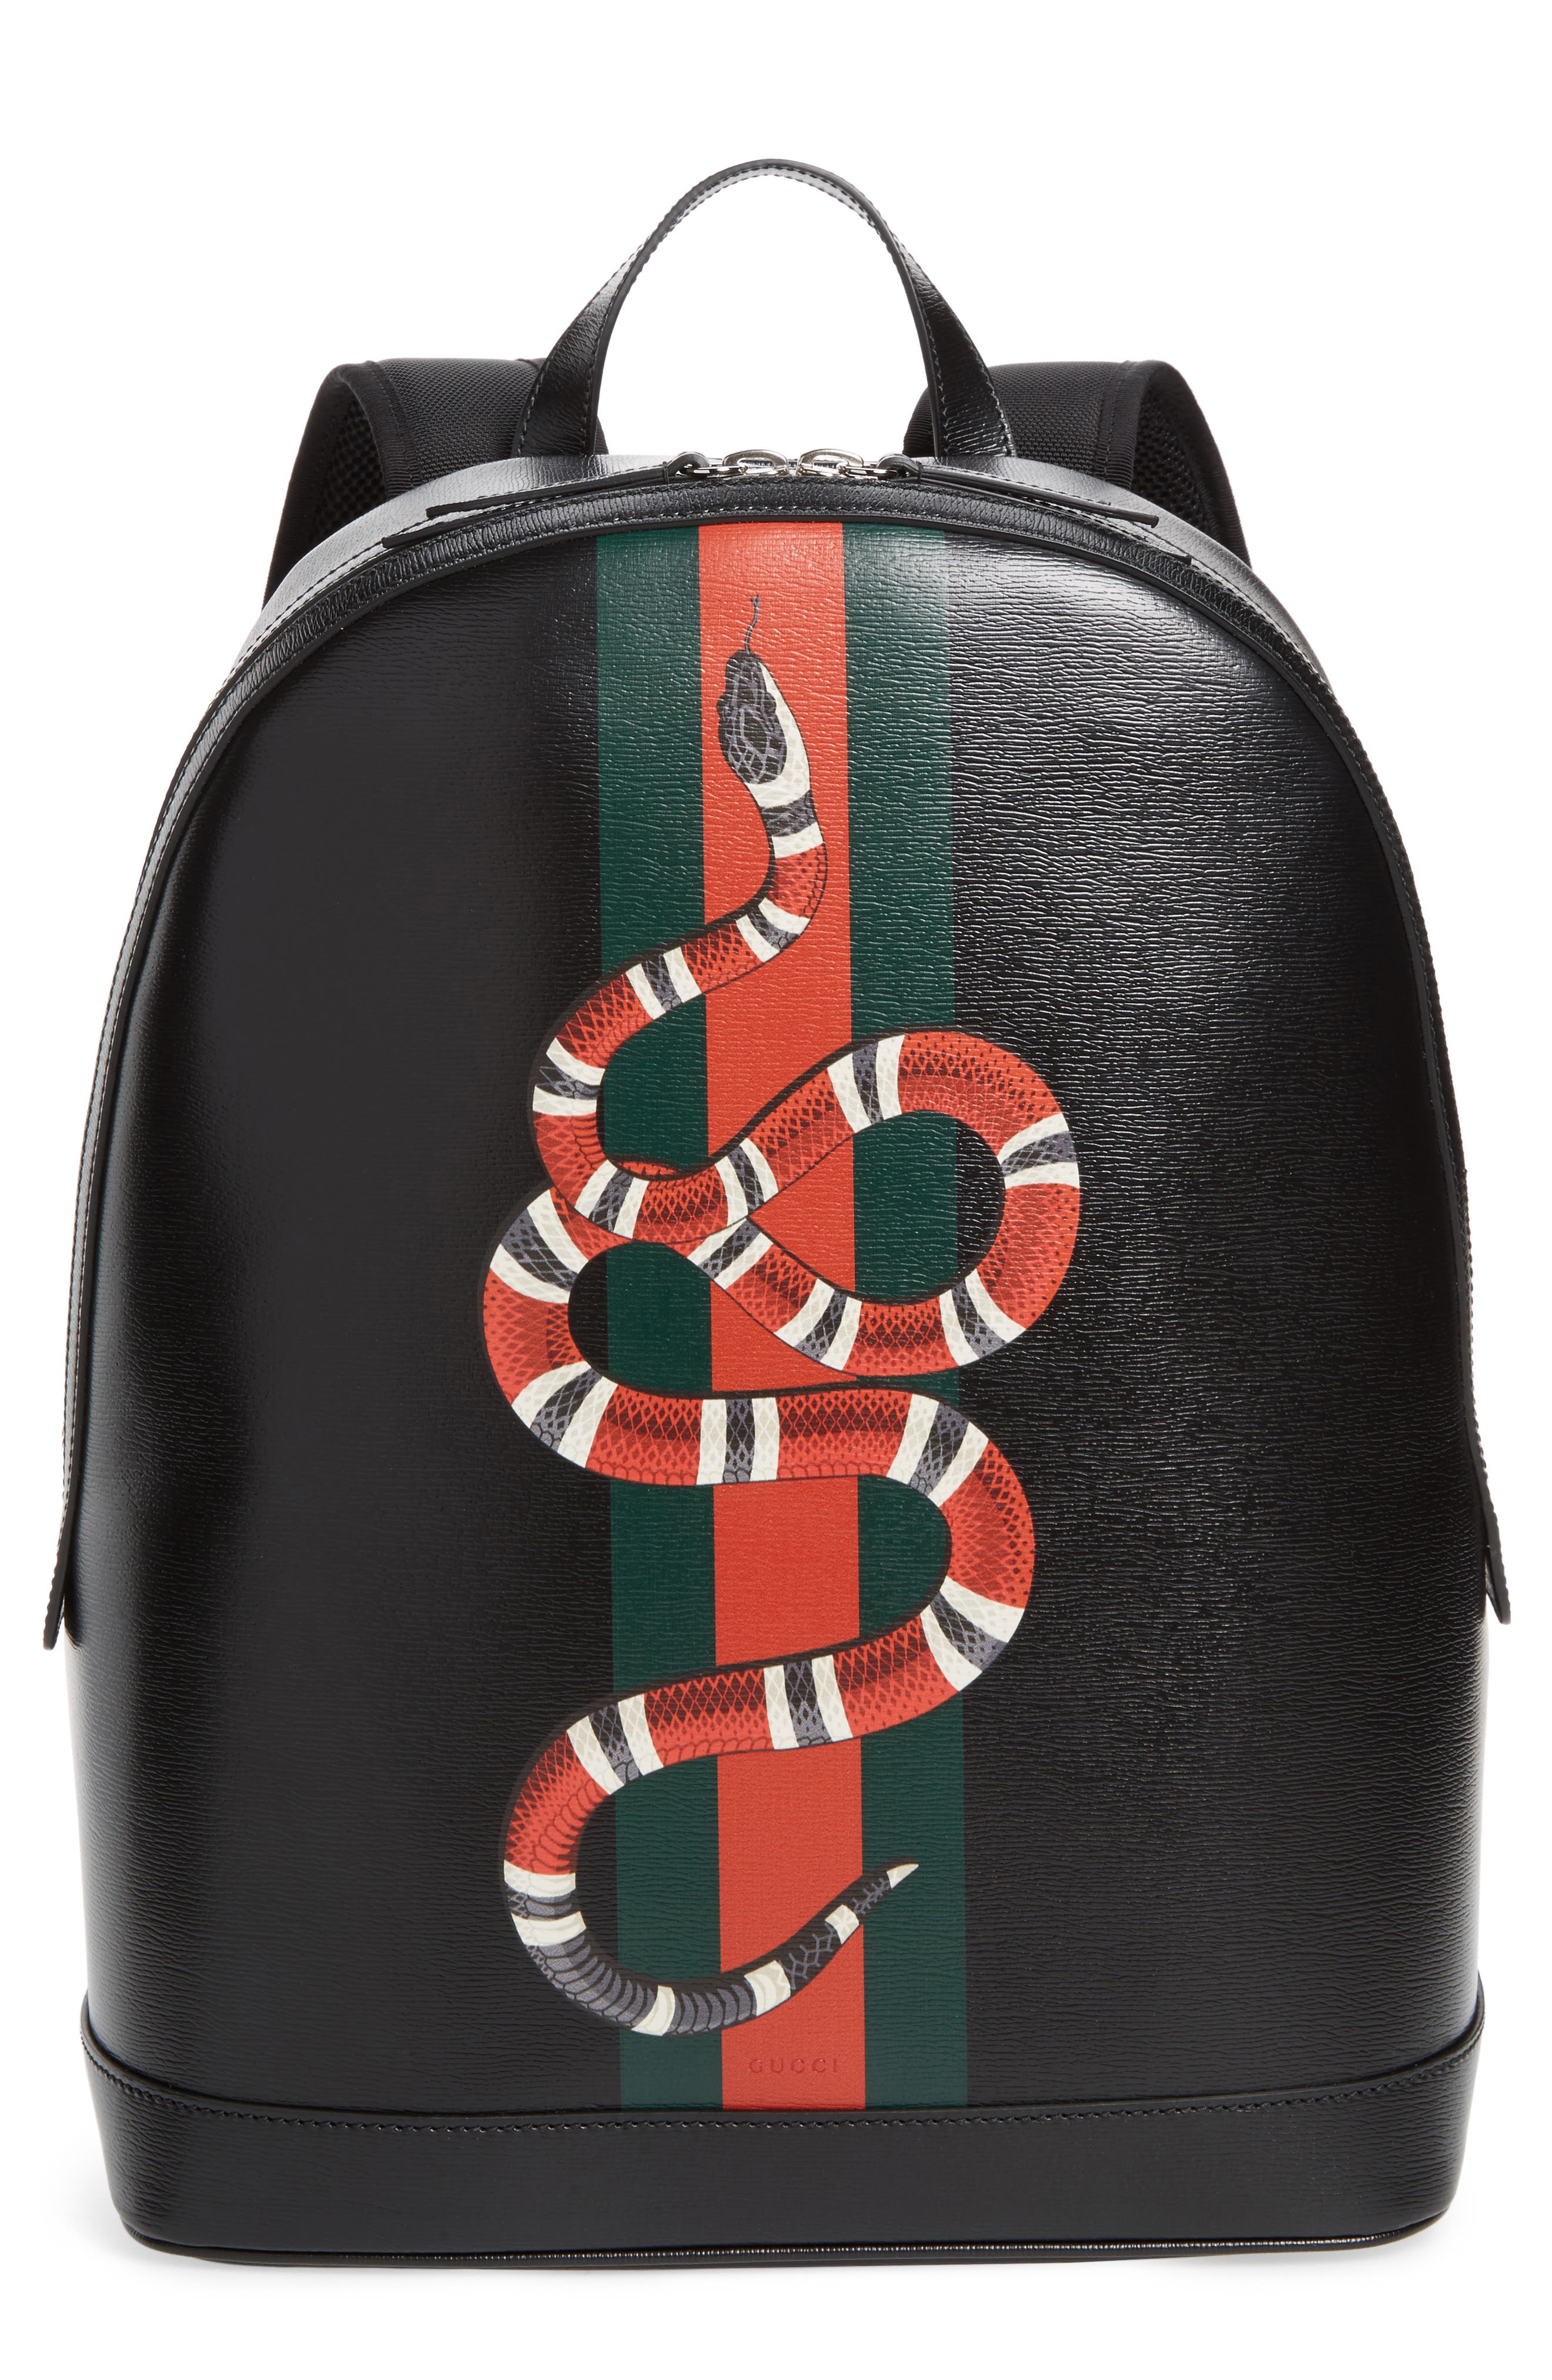 gucci print leather backpack